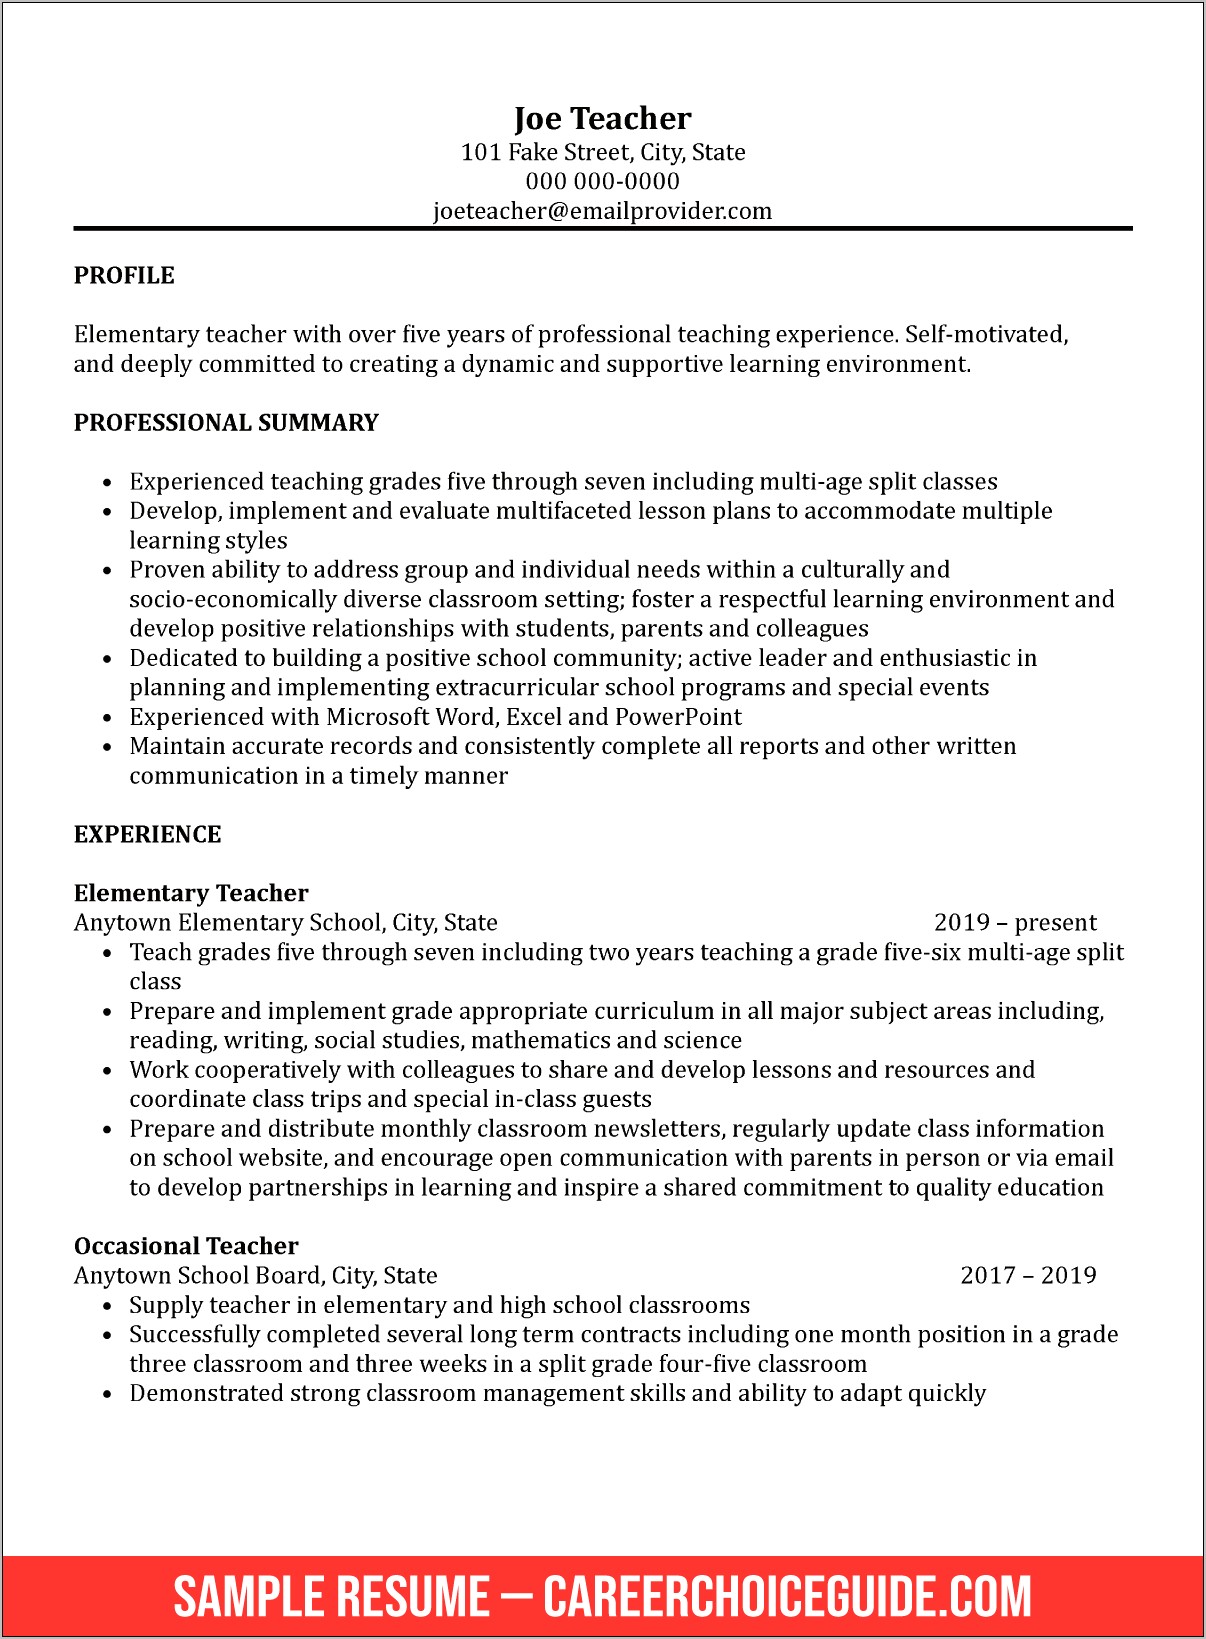 Sample Resume For A Teacher With No Experience